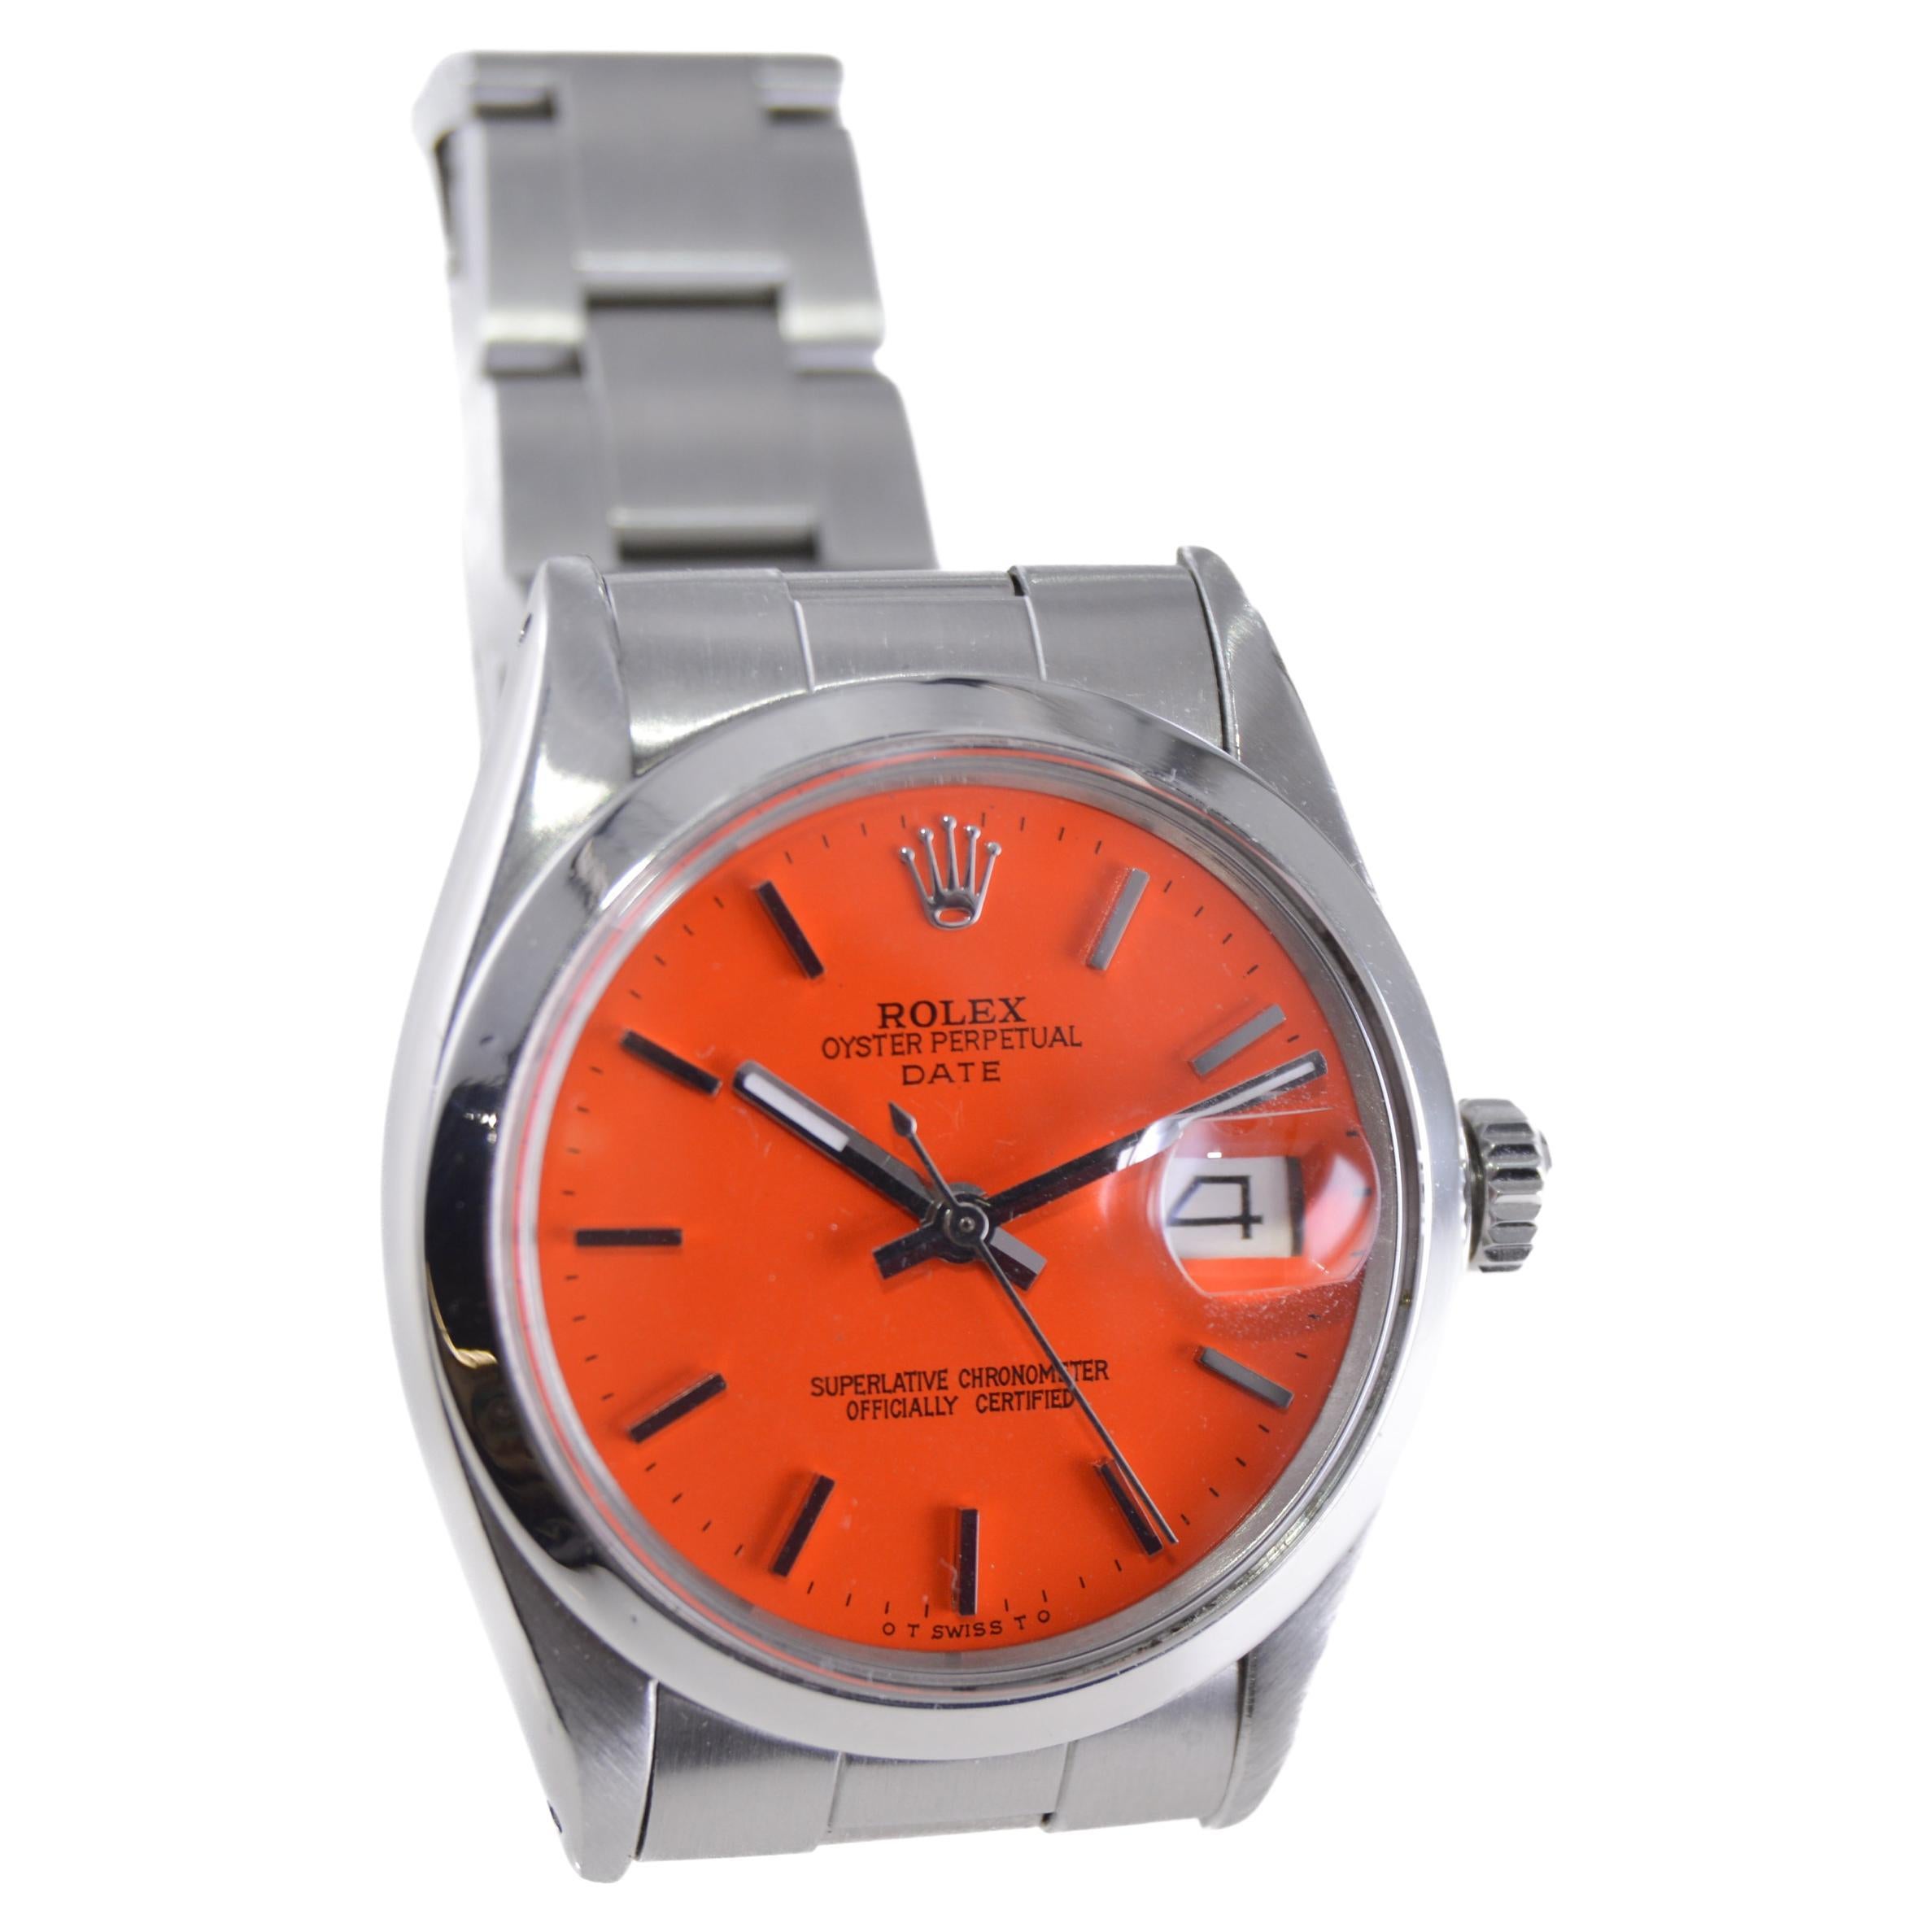 Rolex Stainless Steel Oyster Perpetual Date with Custom Orange Dial 1960s In Excellent Condition For Sale In Long Beach, CA